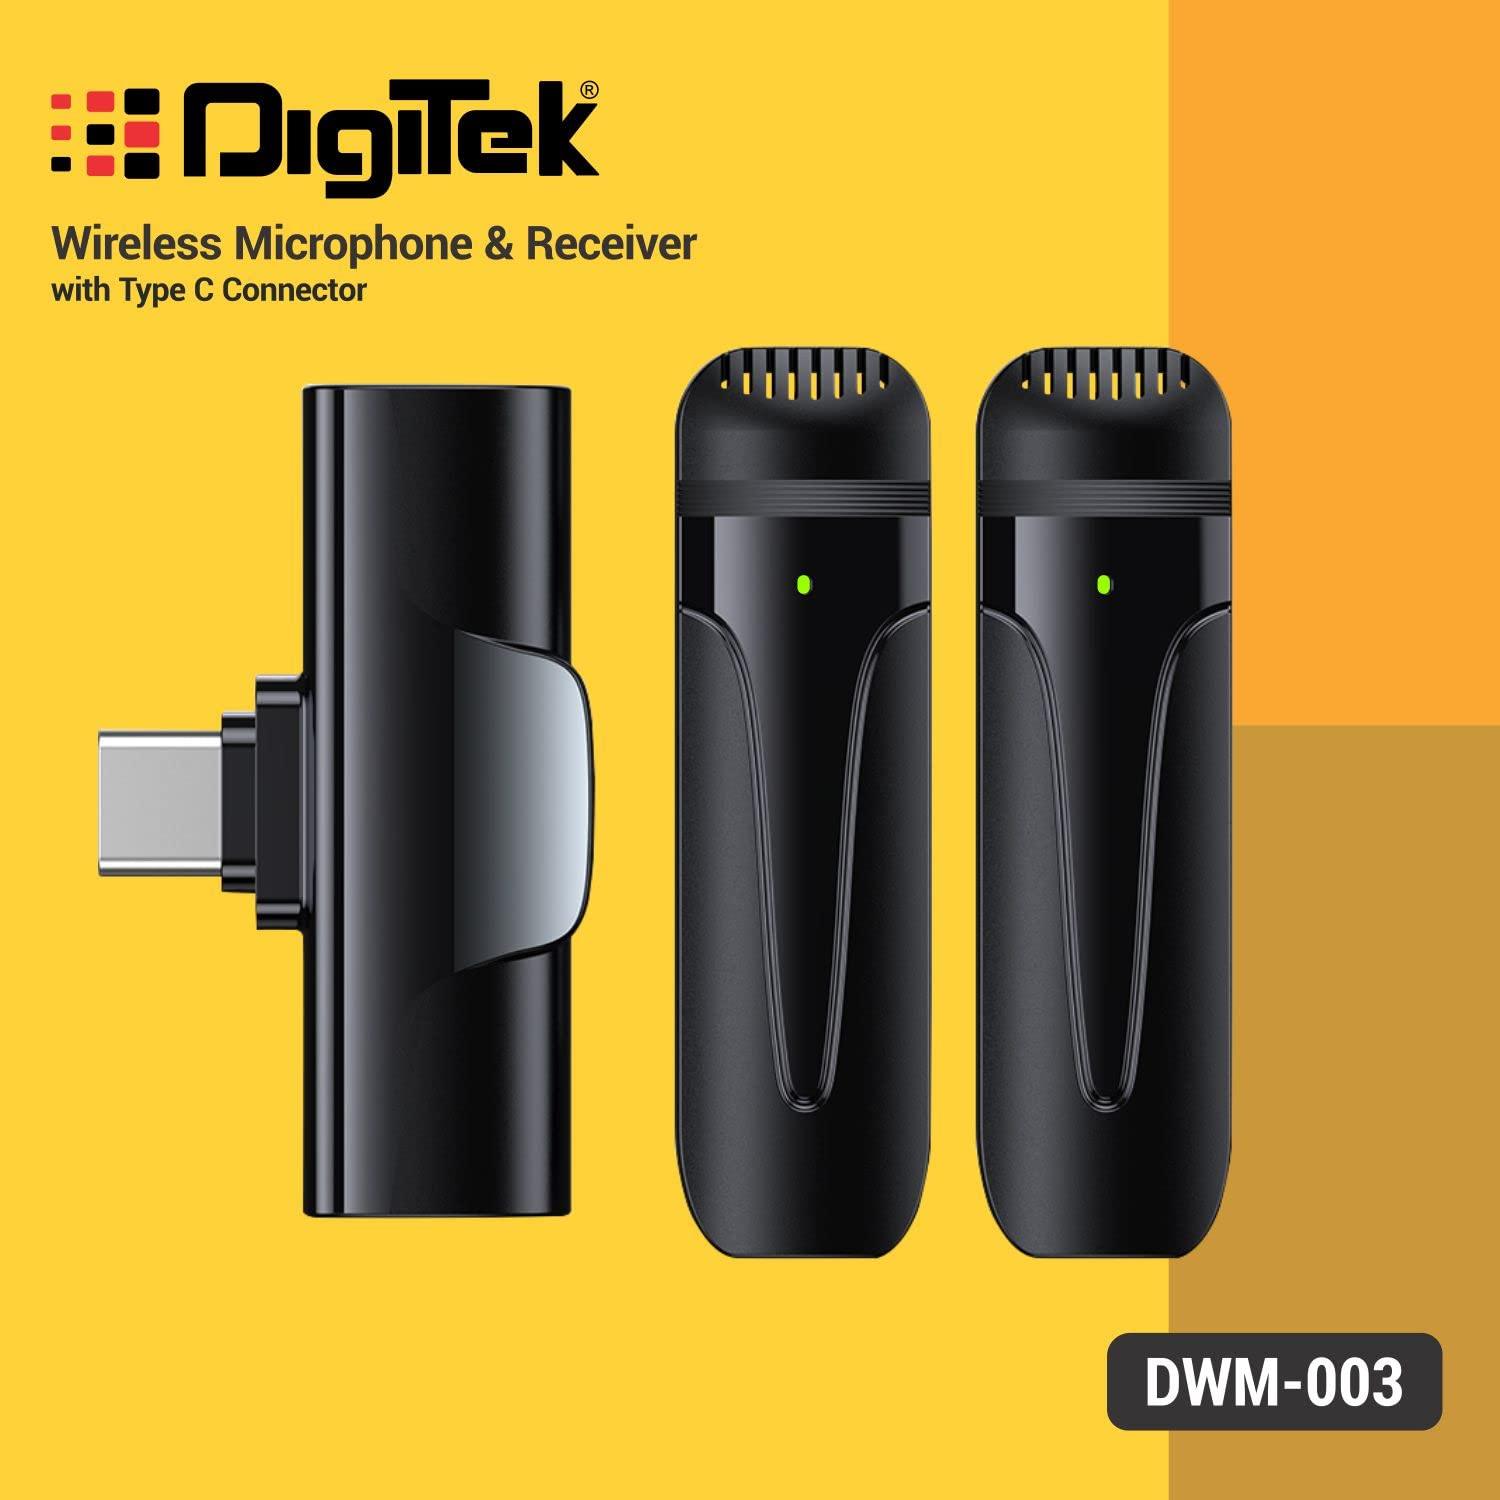 Digitek (DWM-003) 2 Unit Wireless Microphone & 1 Unit Receiver with Type C, Compatible for Noise Cancellation Mic Suitable for Vlog, YouTube, Live Streaming, Video Recording and More - Digitek